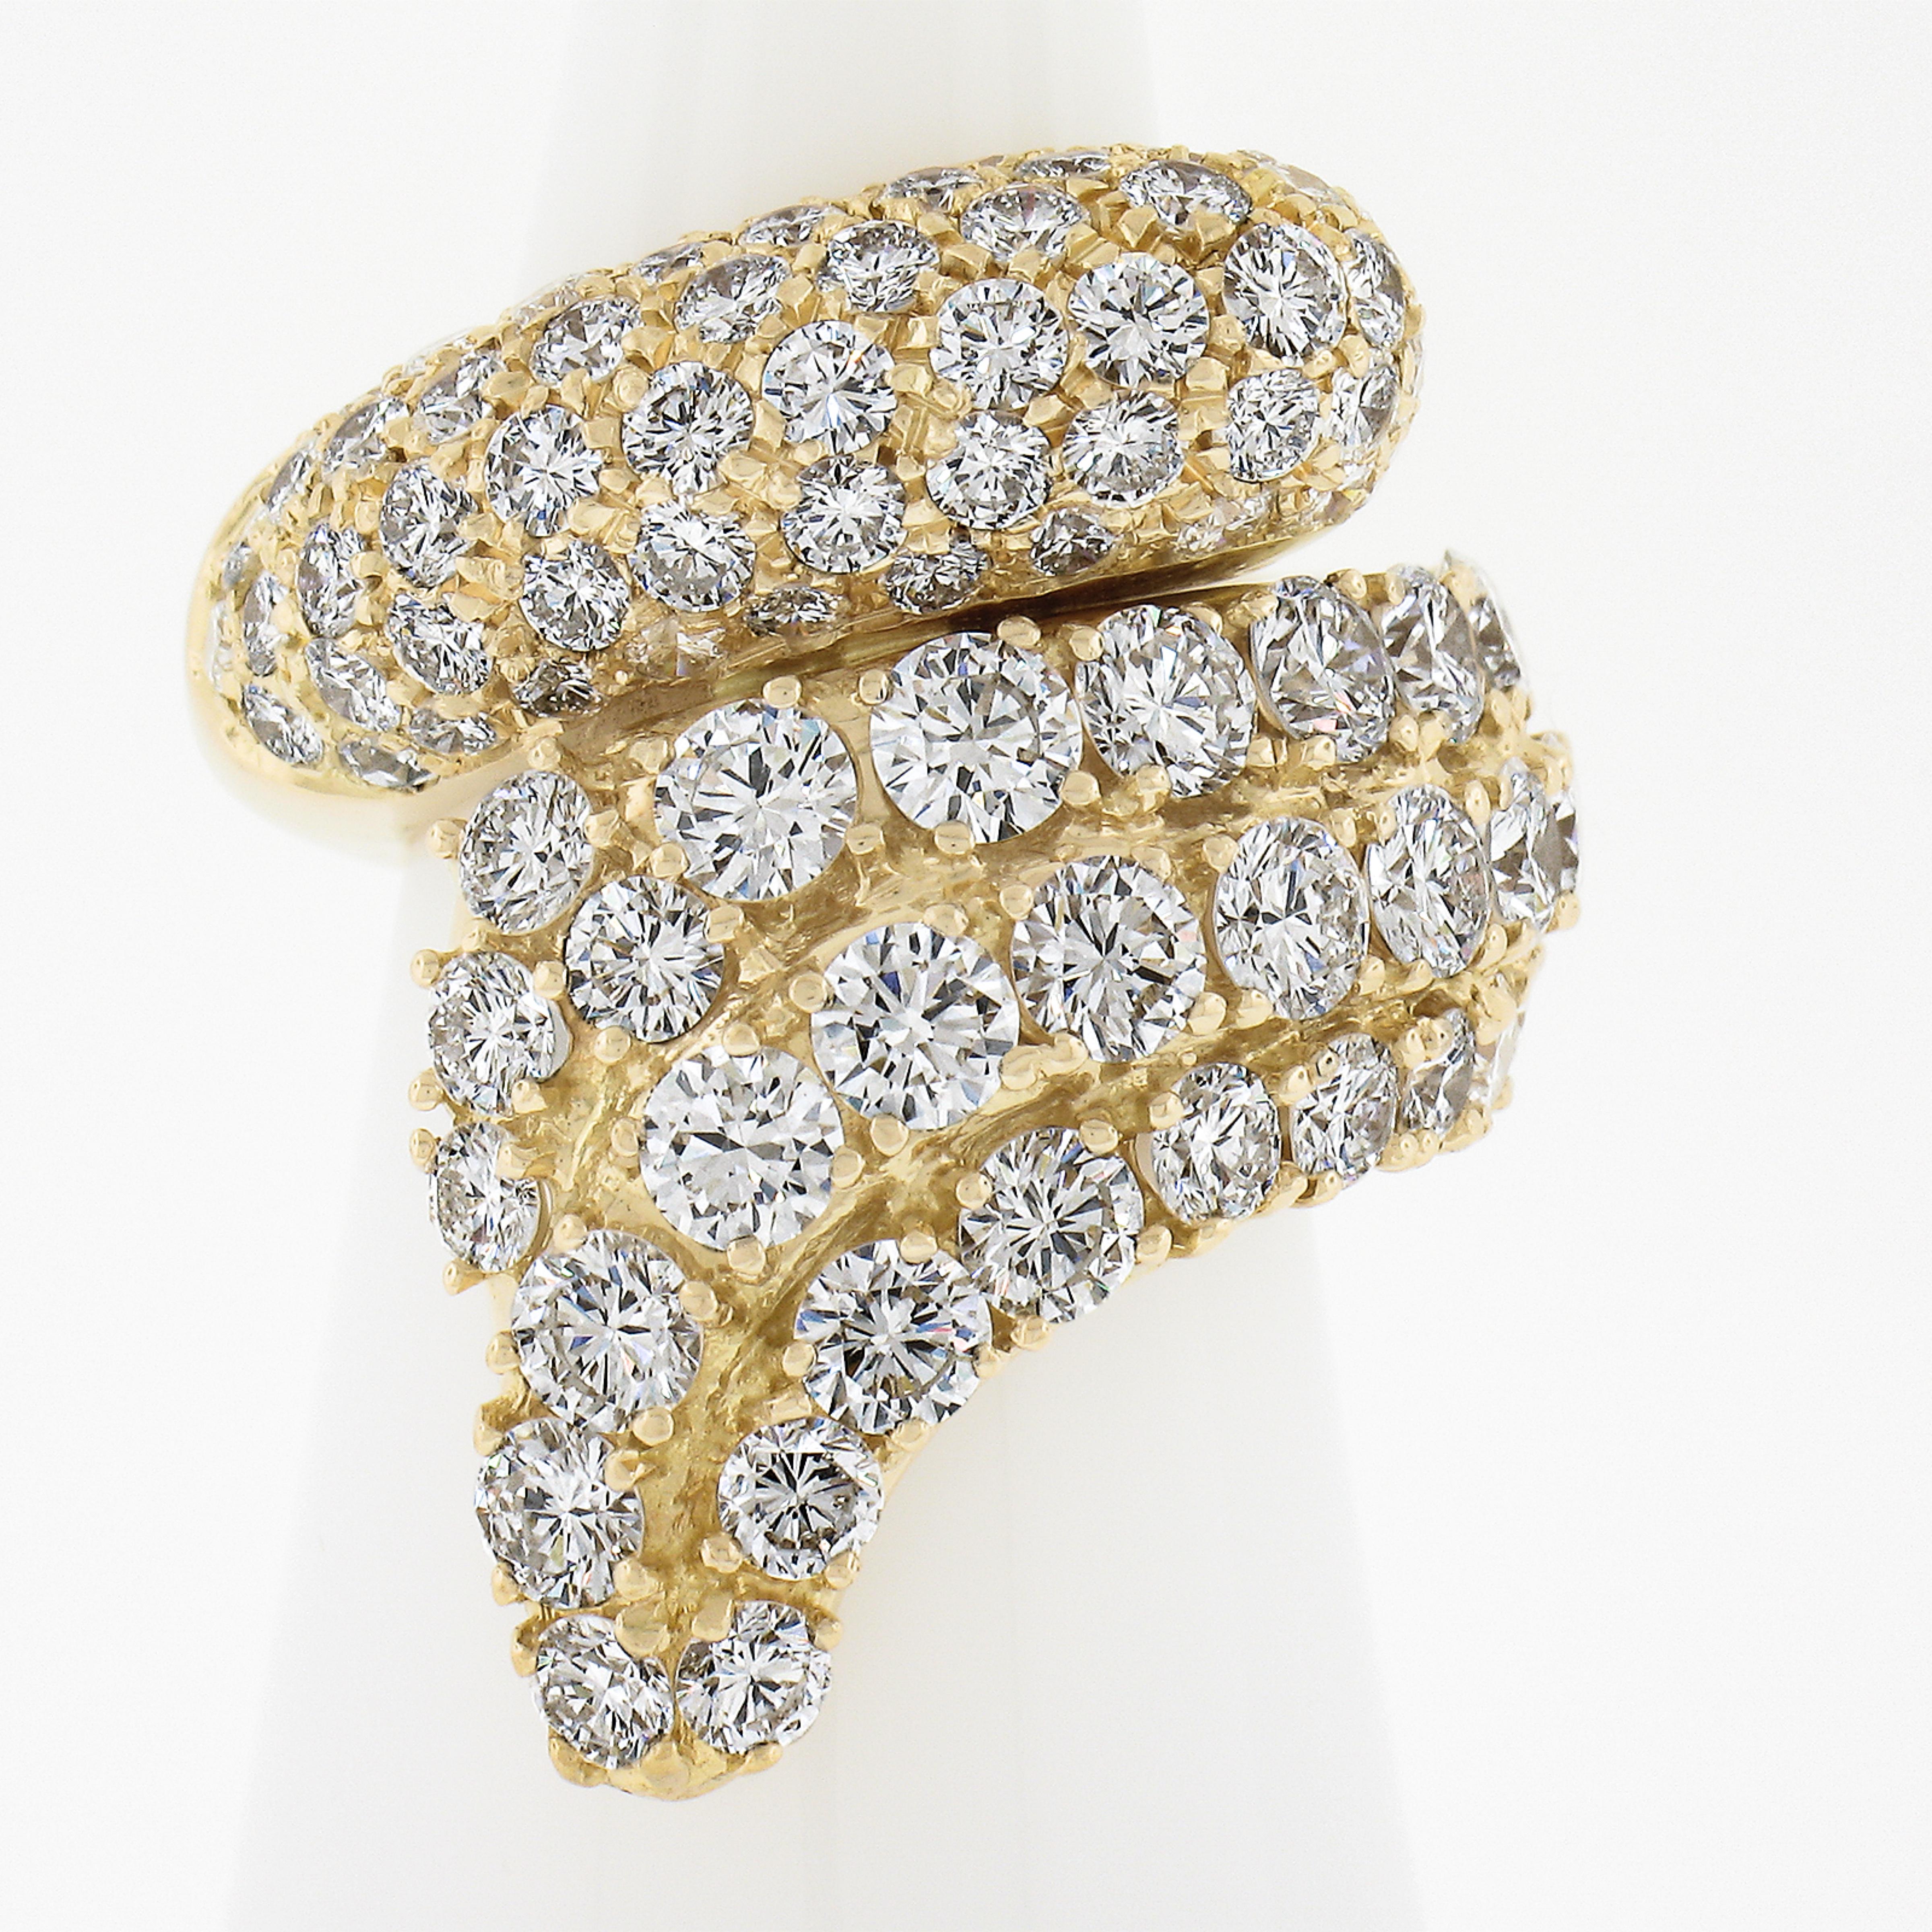 --Stone(s):--
(96) Natural Genuine Diamonds - Round Brilliant Cut - Pavé Set - VVS2-VS2 w/ Few SI1 Clarity - F/G Color 
Total Carat Weight:	6-6.50 (approx.)

Material: Solid 18k Yellow Gold
Weight: 13.75 Grams
Ring Size: 5.5 (Fitted on a finger. We